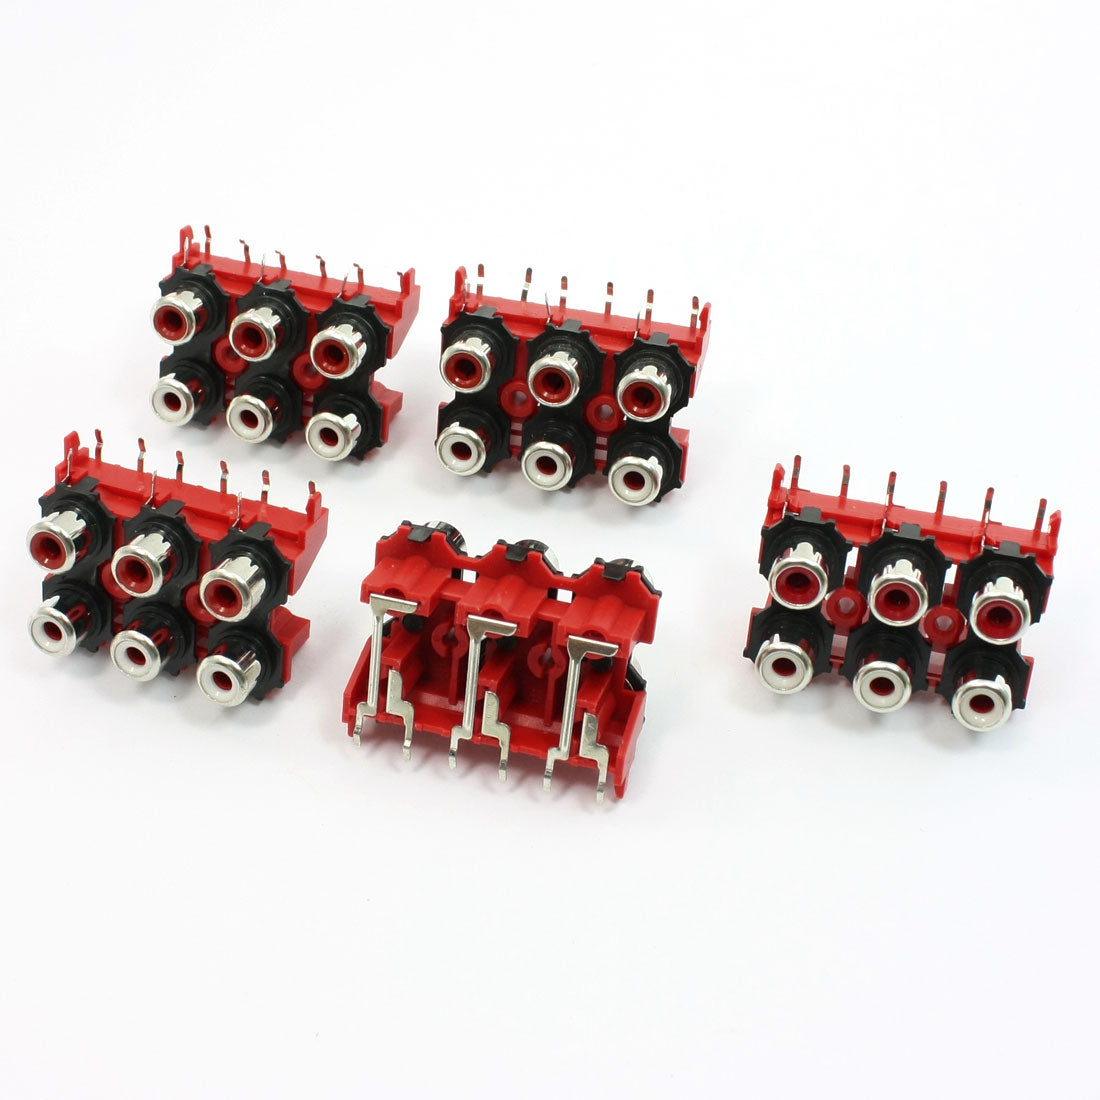 uxcell Uxcell 5 Pcs 6 RCA PCB Mount Female Outlet Jack Connector RCA Socket Black Red